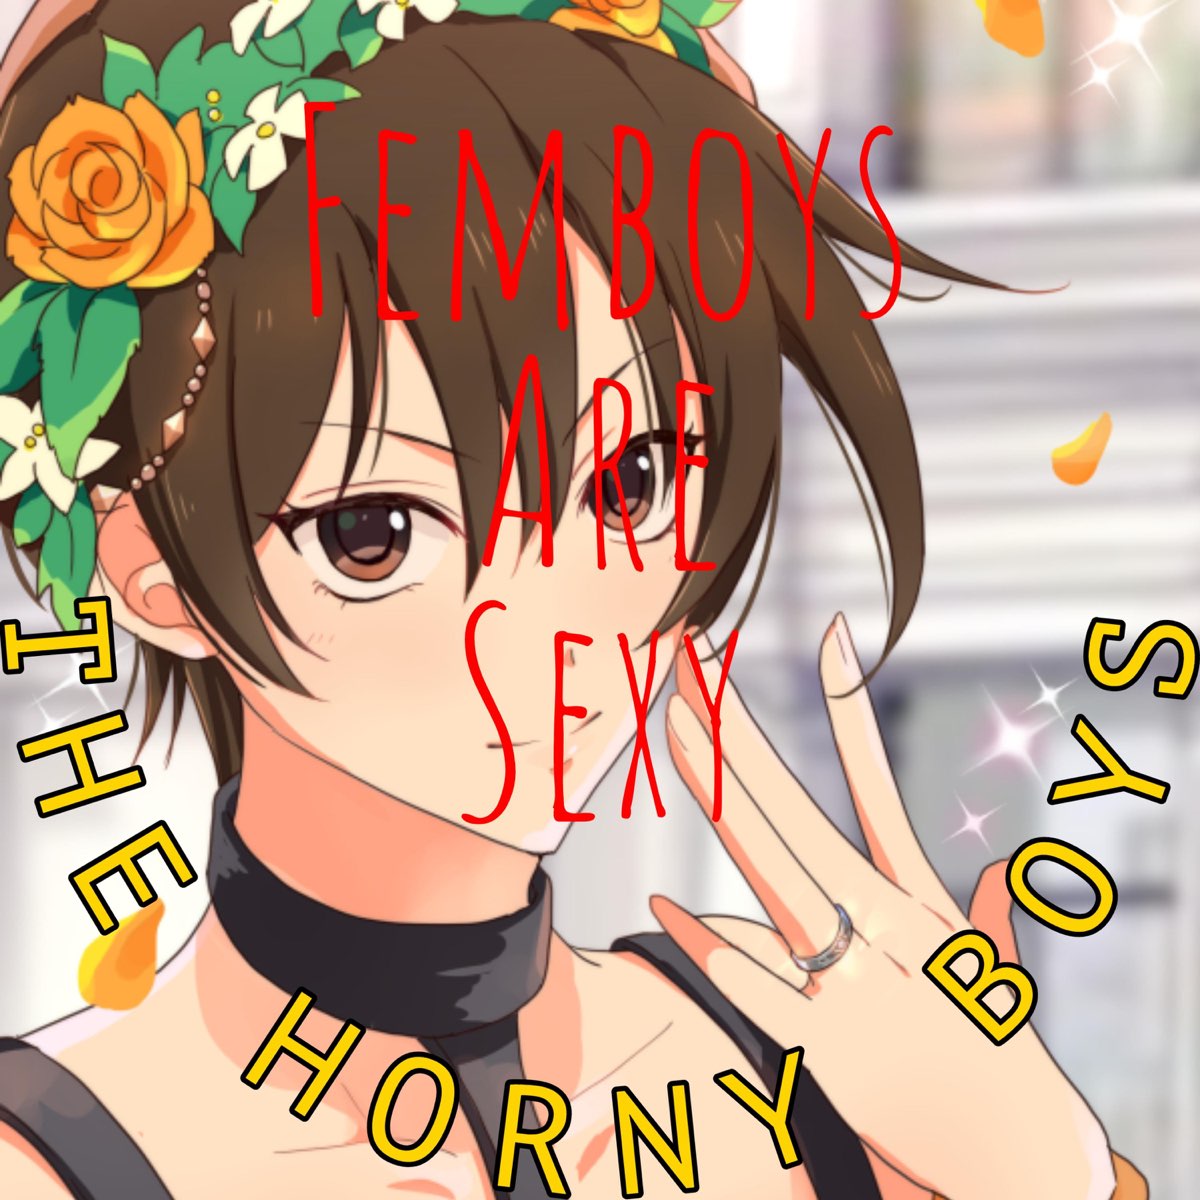 Femboys are Sexy - Single by The Horny Boys on Apple Music